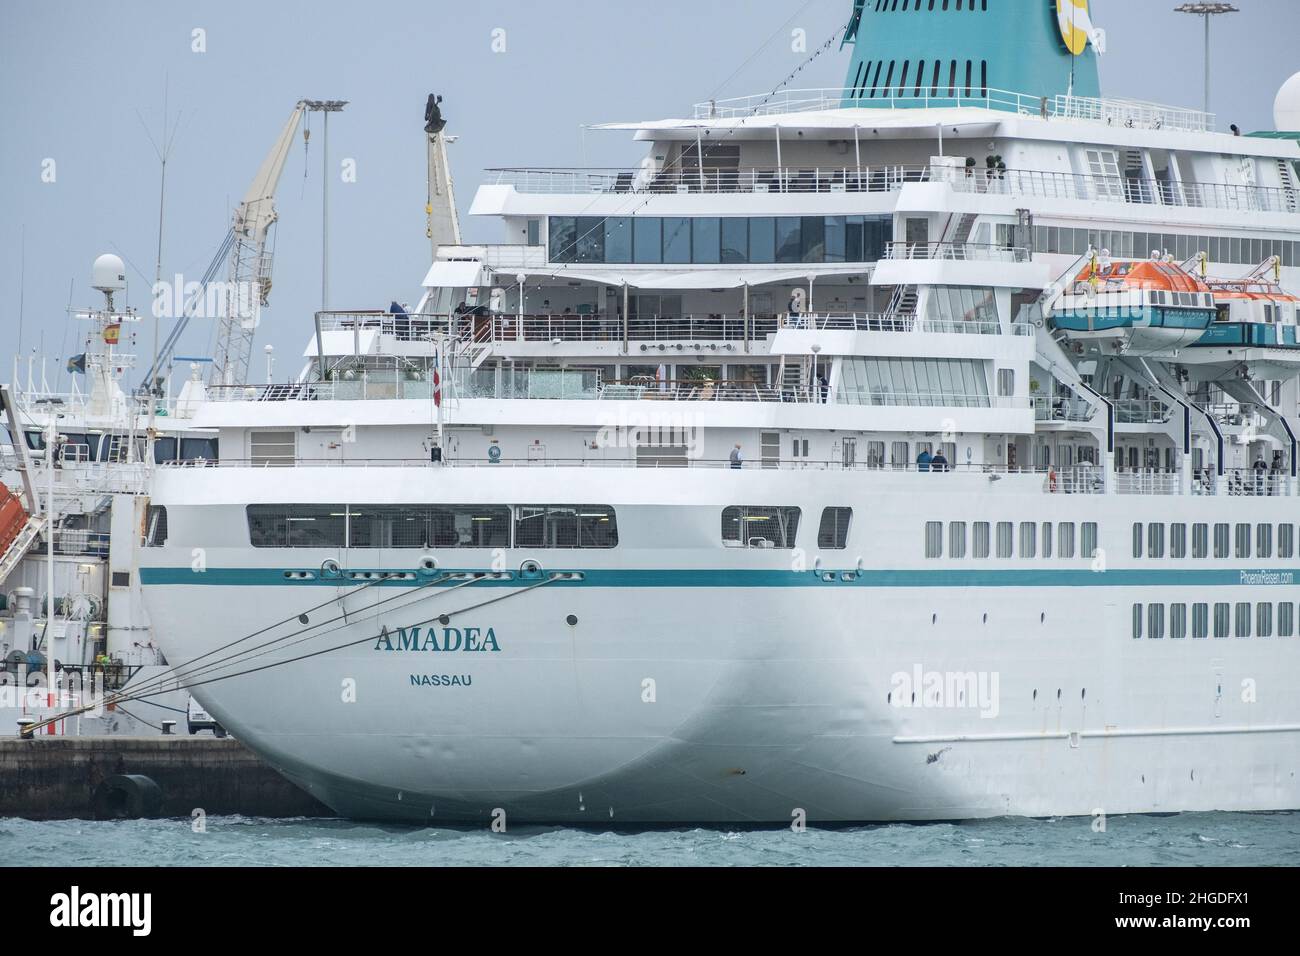 Ms Amadea High Resolution Stock Photography and Images - Alamy